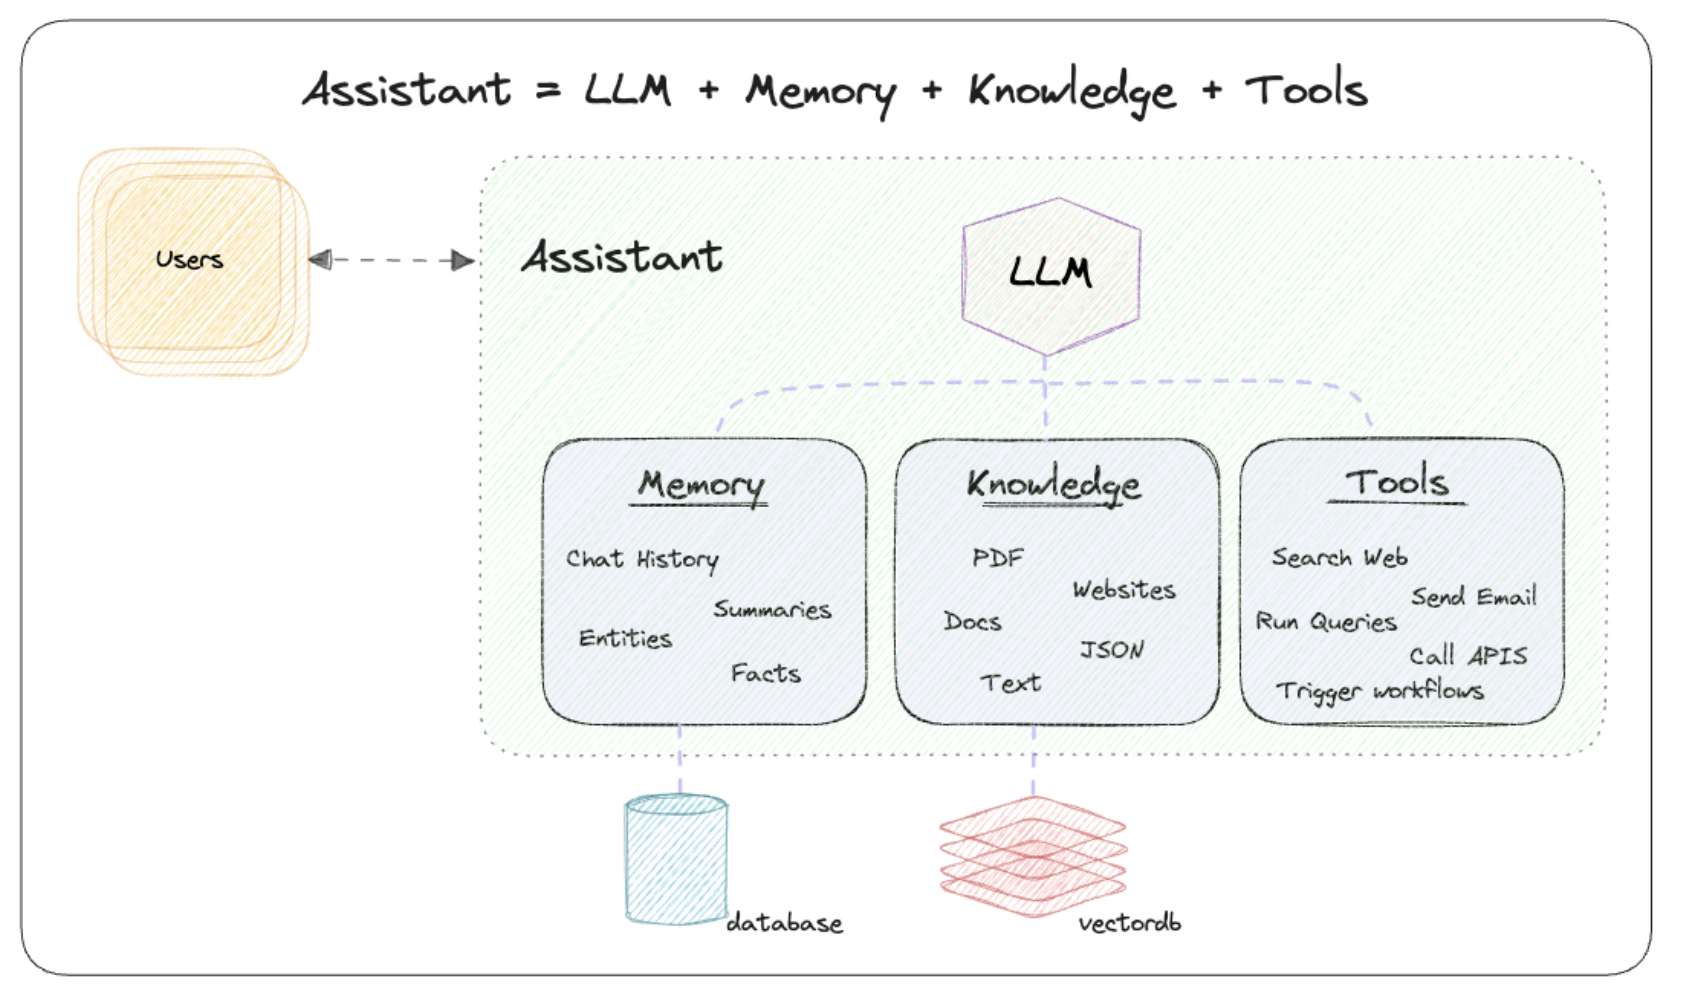  Phidata: An AI Framework for Building Autonomous Assistants with Long-Term Memory, Contextual Knowledge and the Ability to Take Actions Using Function Calling